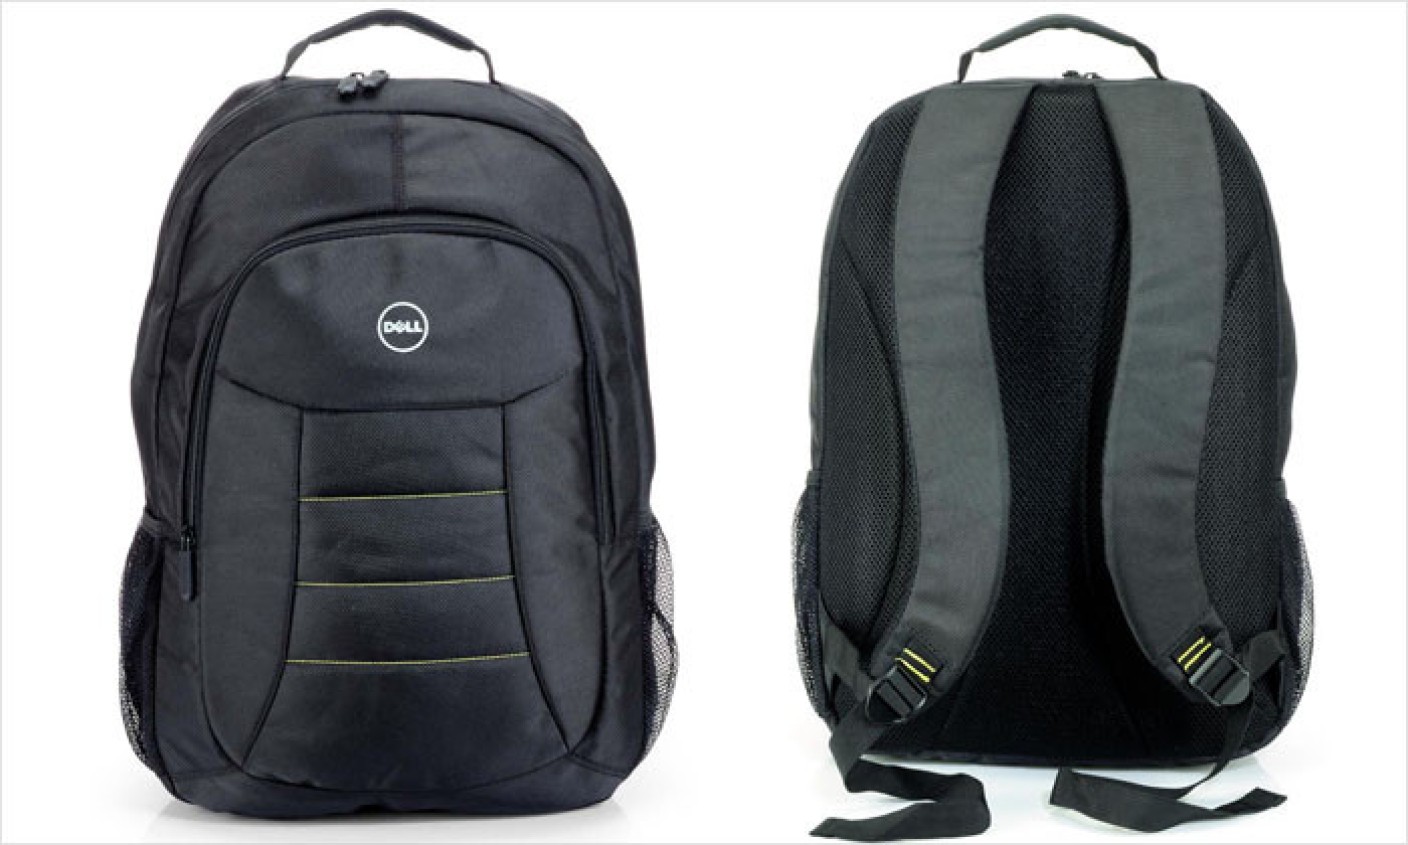 Dell 16 inch Laptop Backpack Black - Price in India | www.neverfullmm.com